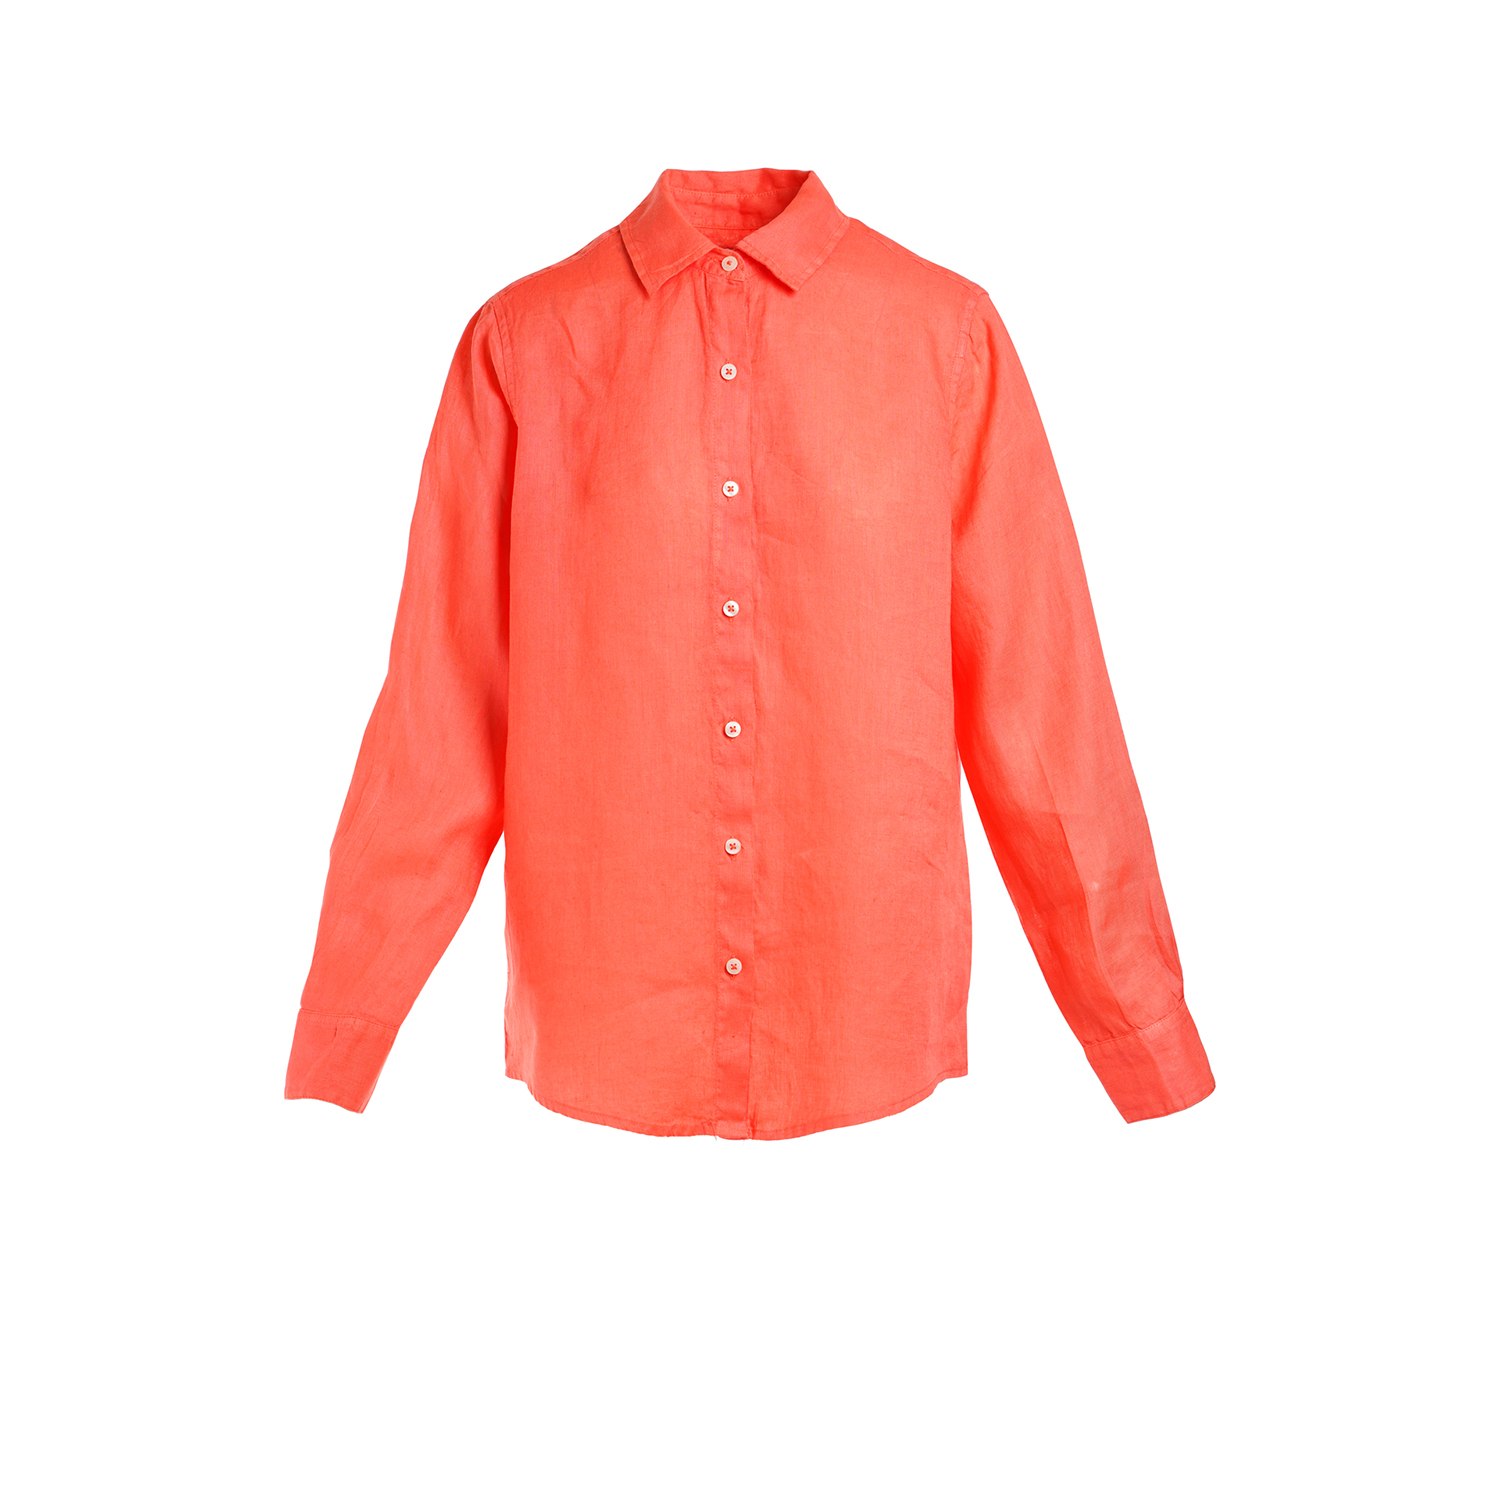 Haris Cotton Women's Red Solid Linen Shirt With Long Sleeved - Coral Reef